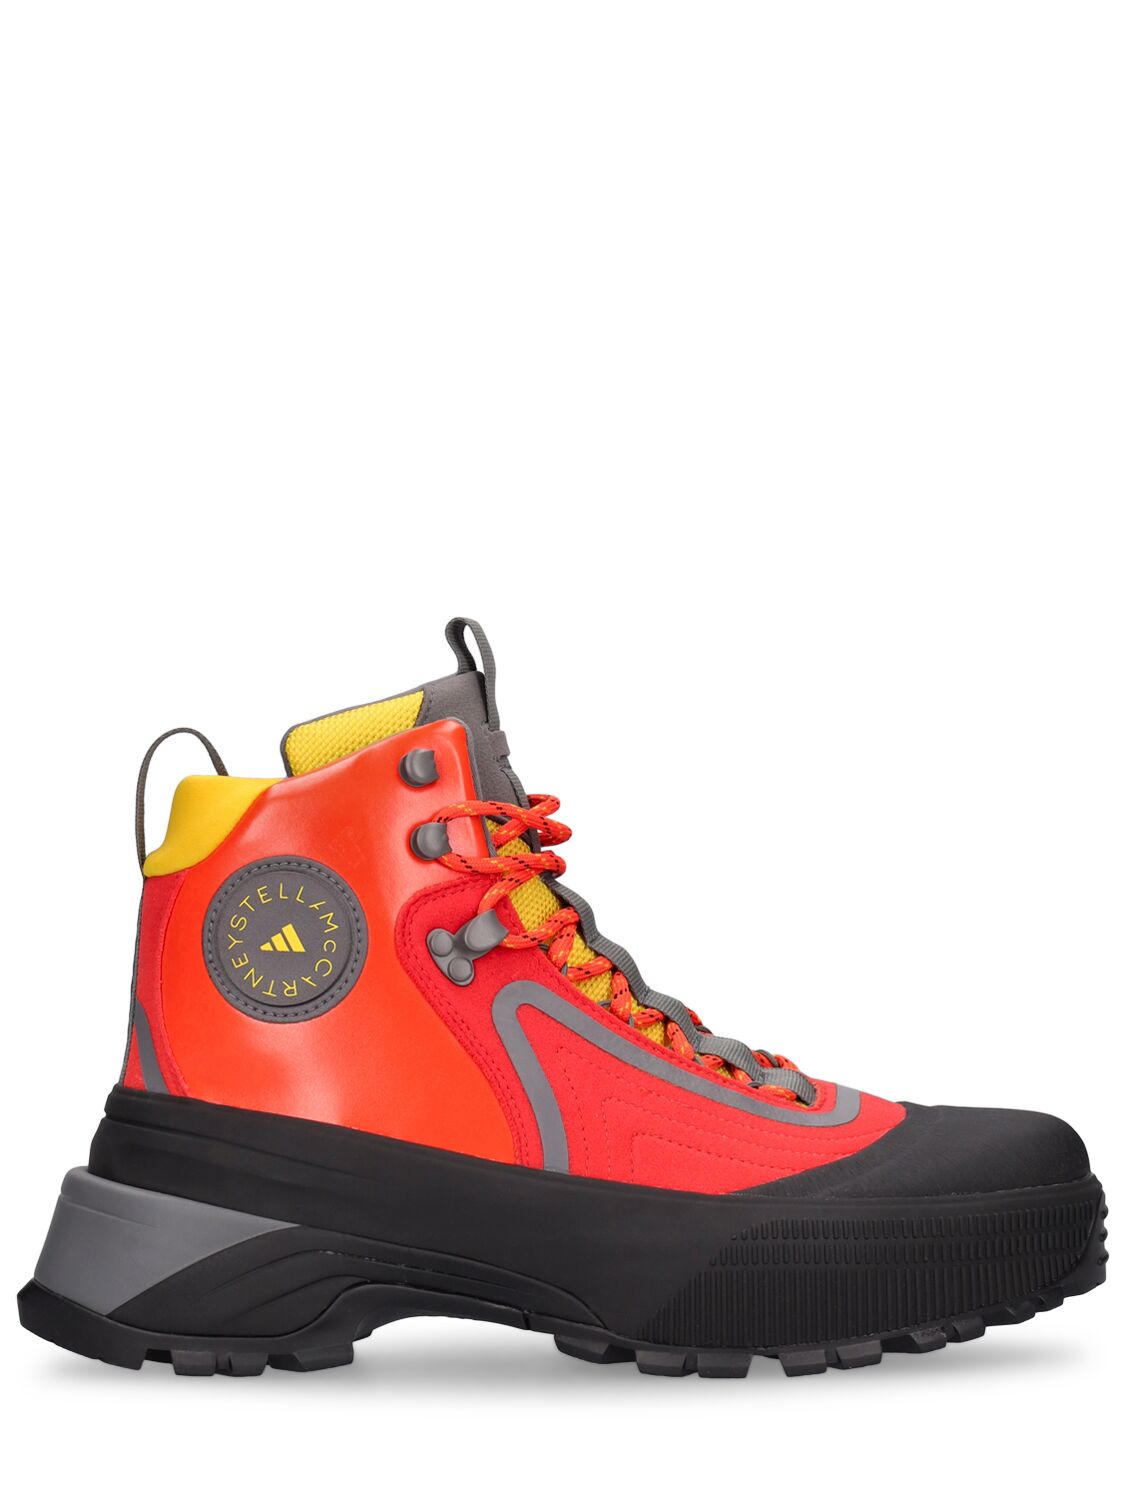 Image of Terrex Free Hike Boots